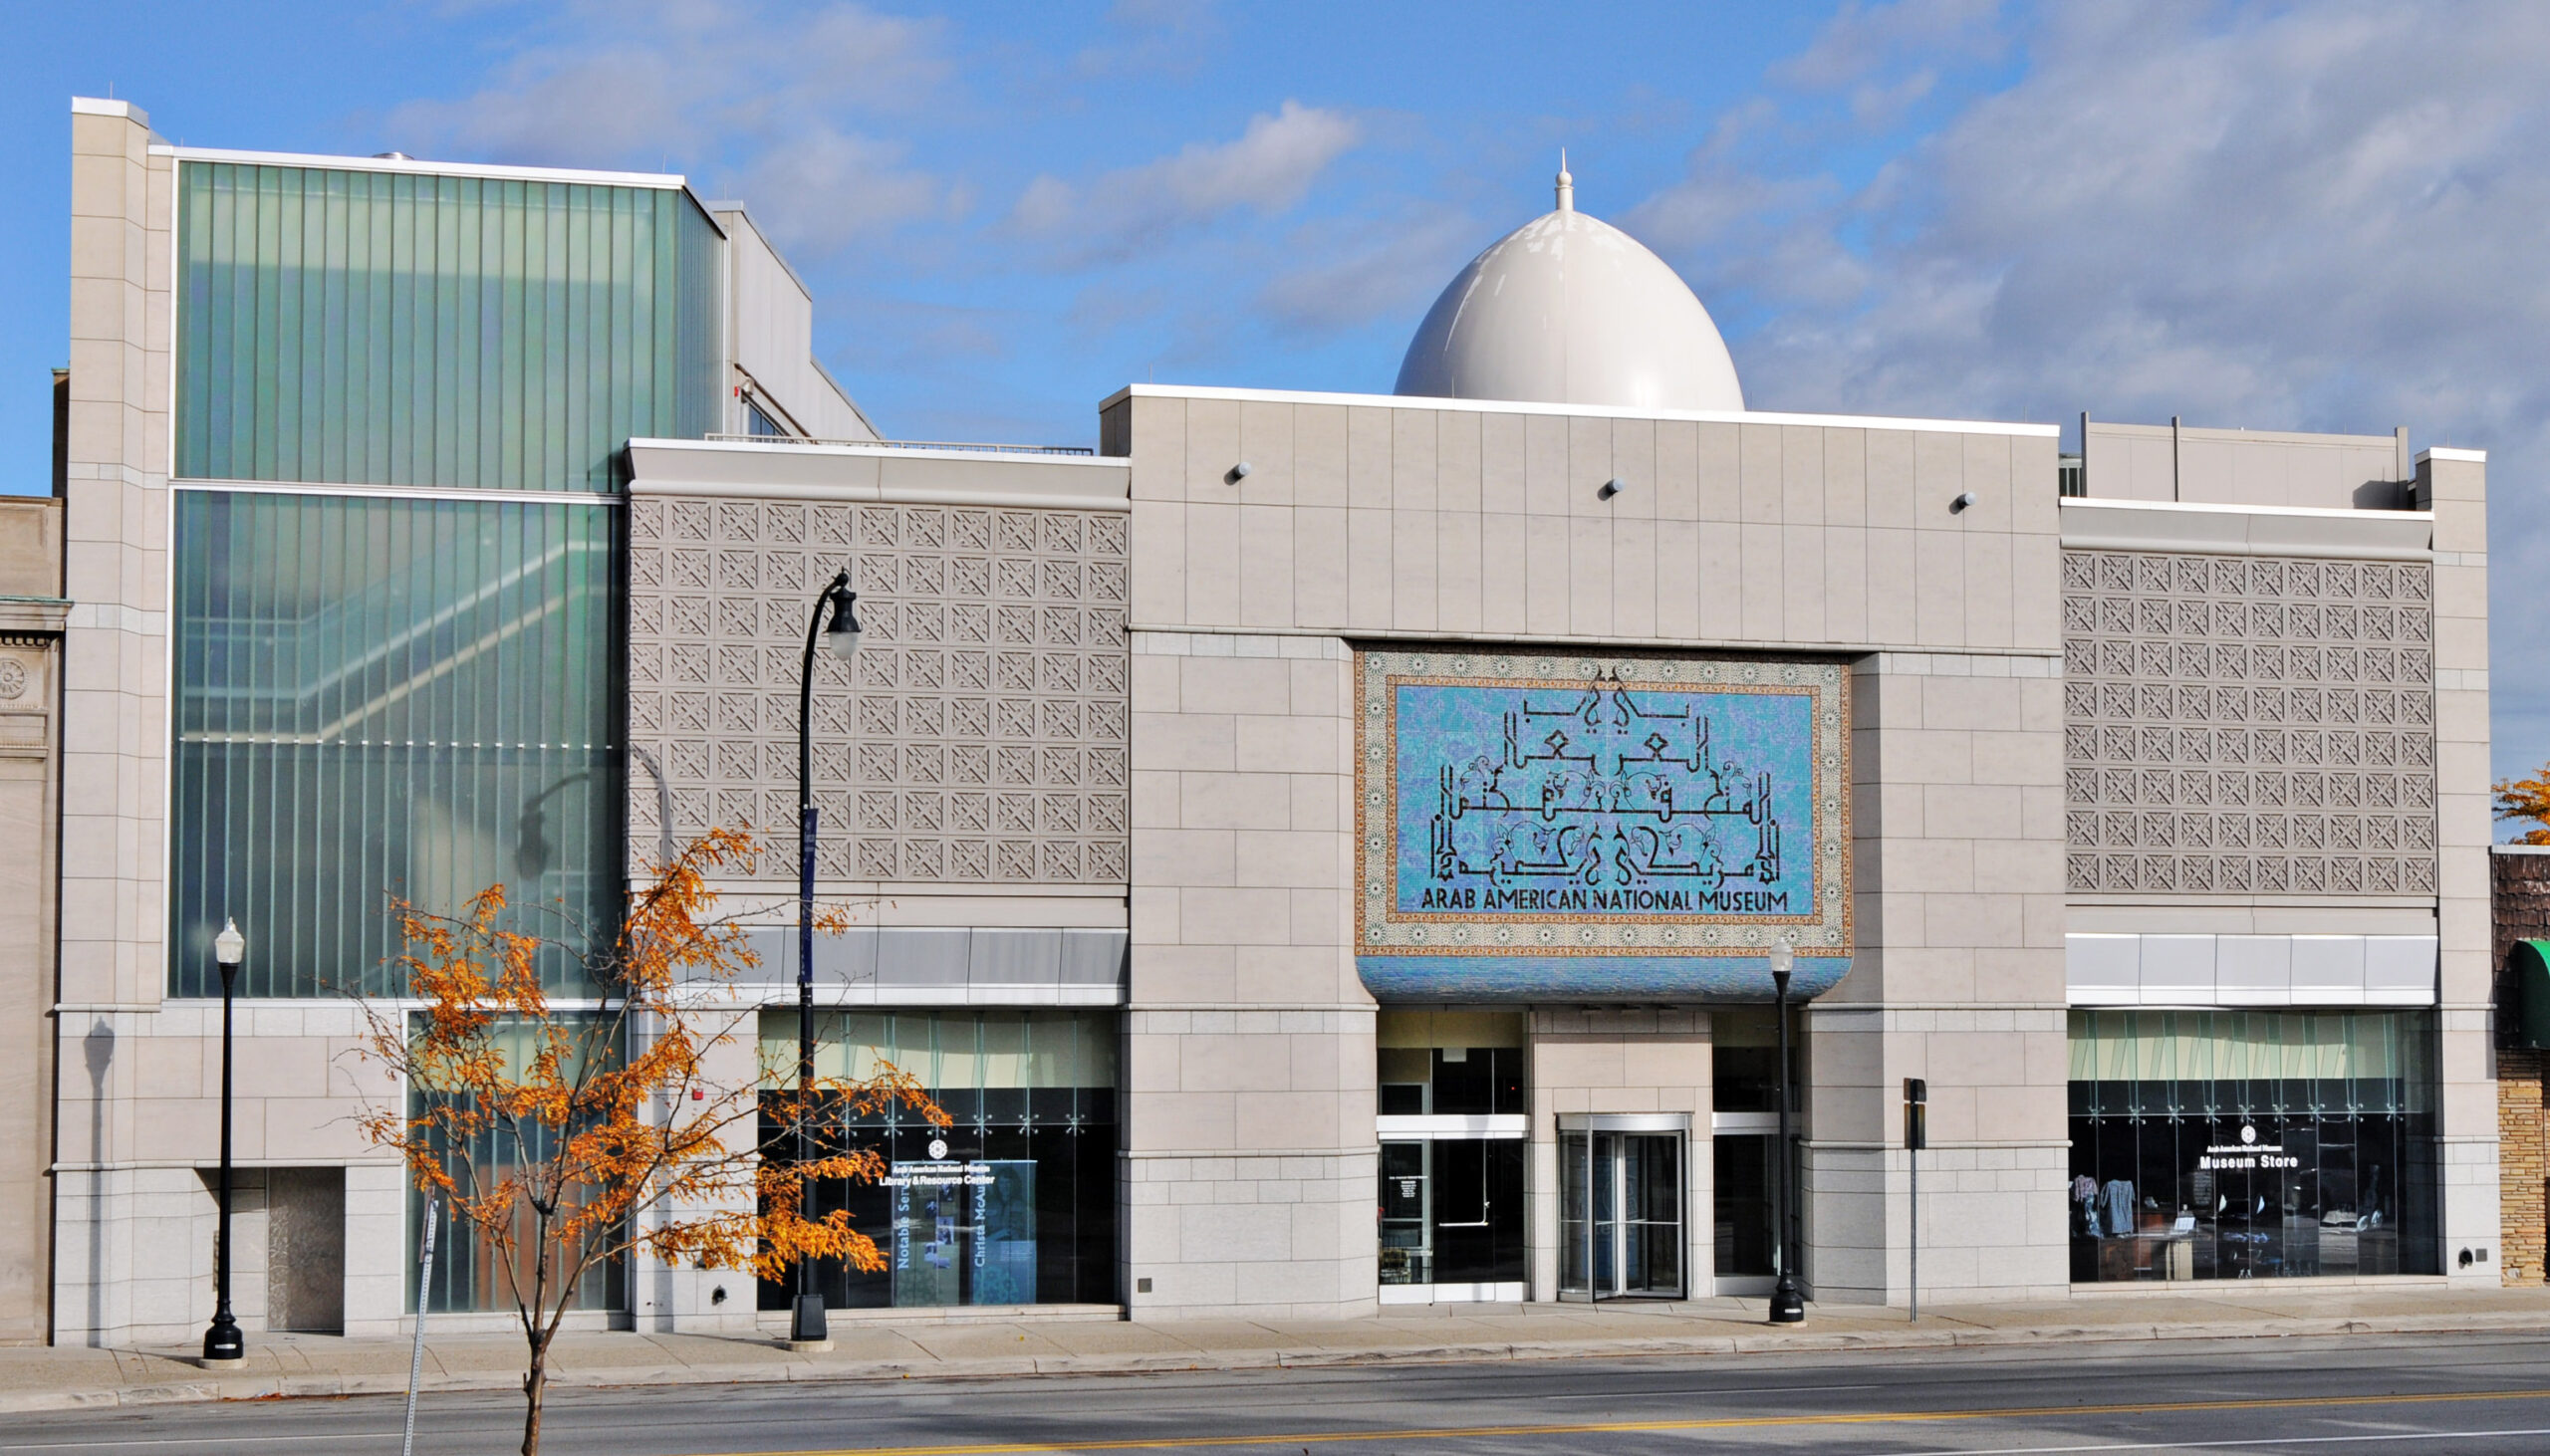 Arab American National Museum – FREE for Kids under 6, FREE with SNAP/EBT or WIC card